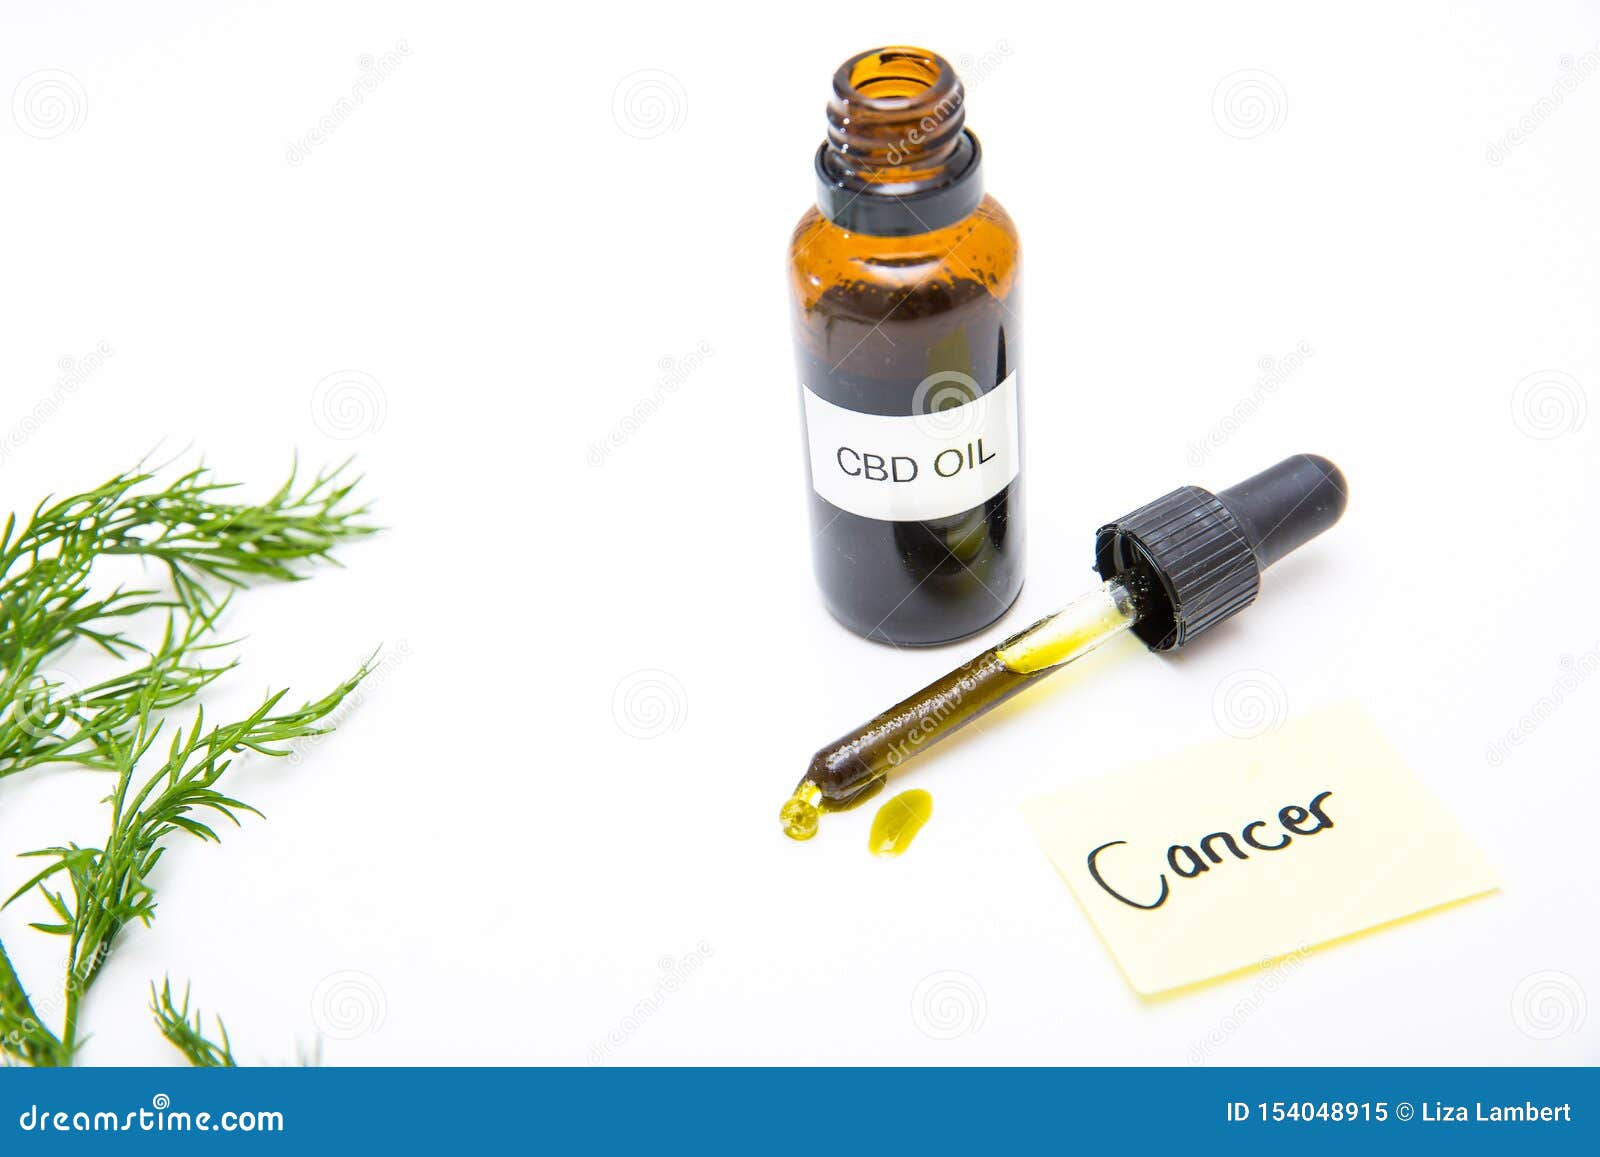 GREEN OIL CANADA CBC - Cbd|Oil|Benefits|Cbc|Effects|Pain|Study|Health|Thc|Products|Cannabinoids|Studies|Research|Anxiety|Cannabis|Symptoms|Evidence|People|System|Disease|Treatment|Inflammation|Hemp|Body|Receptors|Disorders|Brain|Plant|Cells|Side|Effect|Blood|Patients|Cancer|Product|Skin|Marijuana|Properties|Cannabidiol|Cannabinoid|Cbd Oil|Cbd Products|Cbc Oil|Side Effects|Endocannabinoid System|Chronic Pain|Multiple Sclerosis|Pain Relief|Cannabis Plant|Cbd Oil Benefits|Blood Pressure|Health Benefits|High Blood Pressure|Anti-Inflammatory Properties|Neuropathic Pain|Animal Studies|Hemp Plant|Hemp Oil|Anxiety Disorders|Cbd Product|Immune System|Clinical Trials|Cbd Gummies|Nerve Cells|Nervous System|Entourage Effect|Hemp Seed Oil|United States|Cbd Oils|Drug Administration